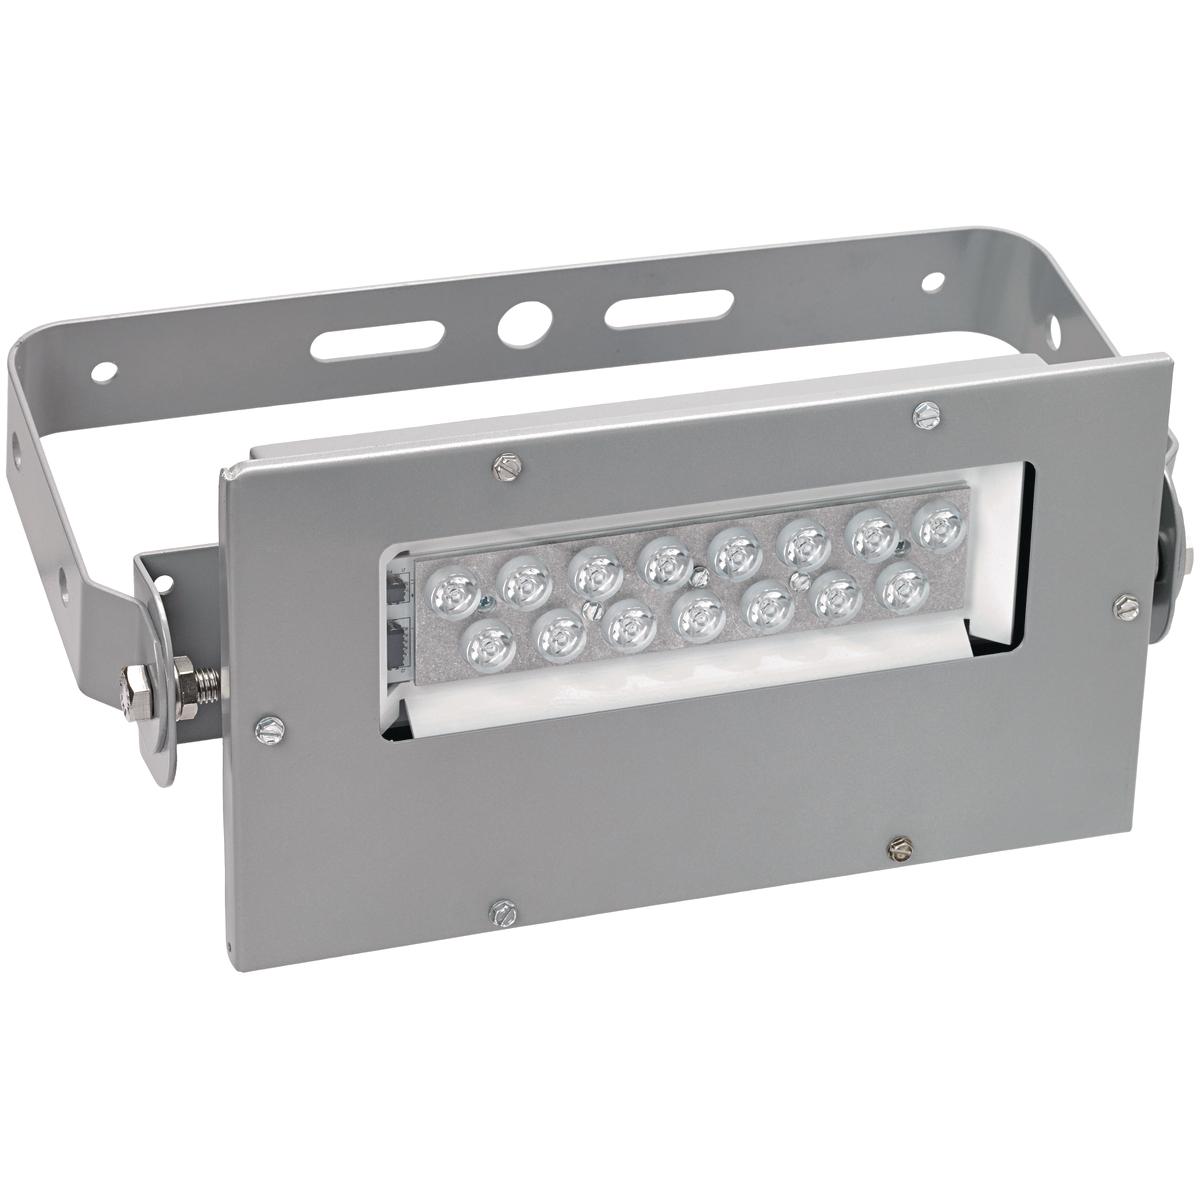 Hubbell KFLC1527 The KFLC Series compact LED floodlights are designed with a copper-free aluminum housing and painted with a powder epoxy finish for superior corrosion resistance in harsh and hazardous environments. Killark LED floodlights provide a crisp white light that